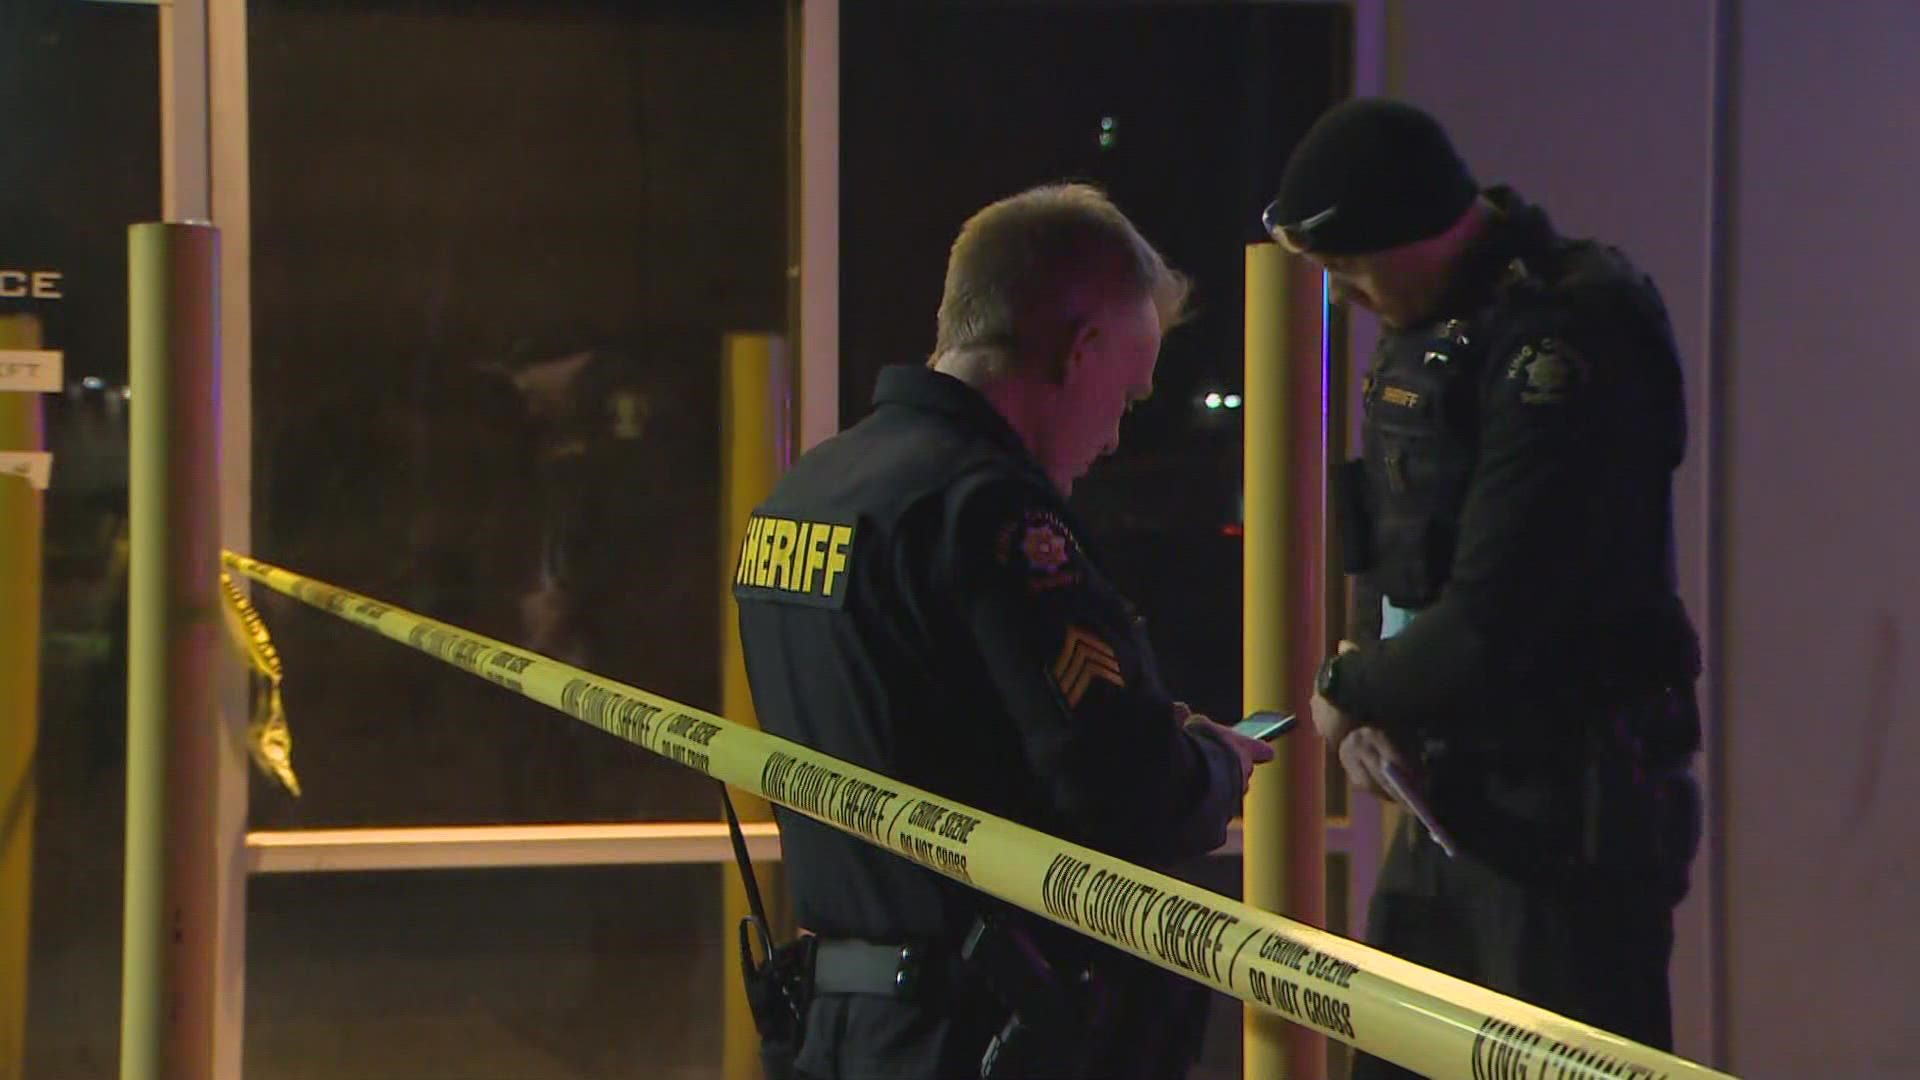 Tacoma police officers attempted to save the employee's life but he died at the scene.